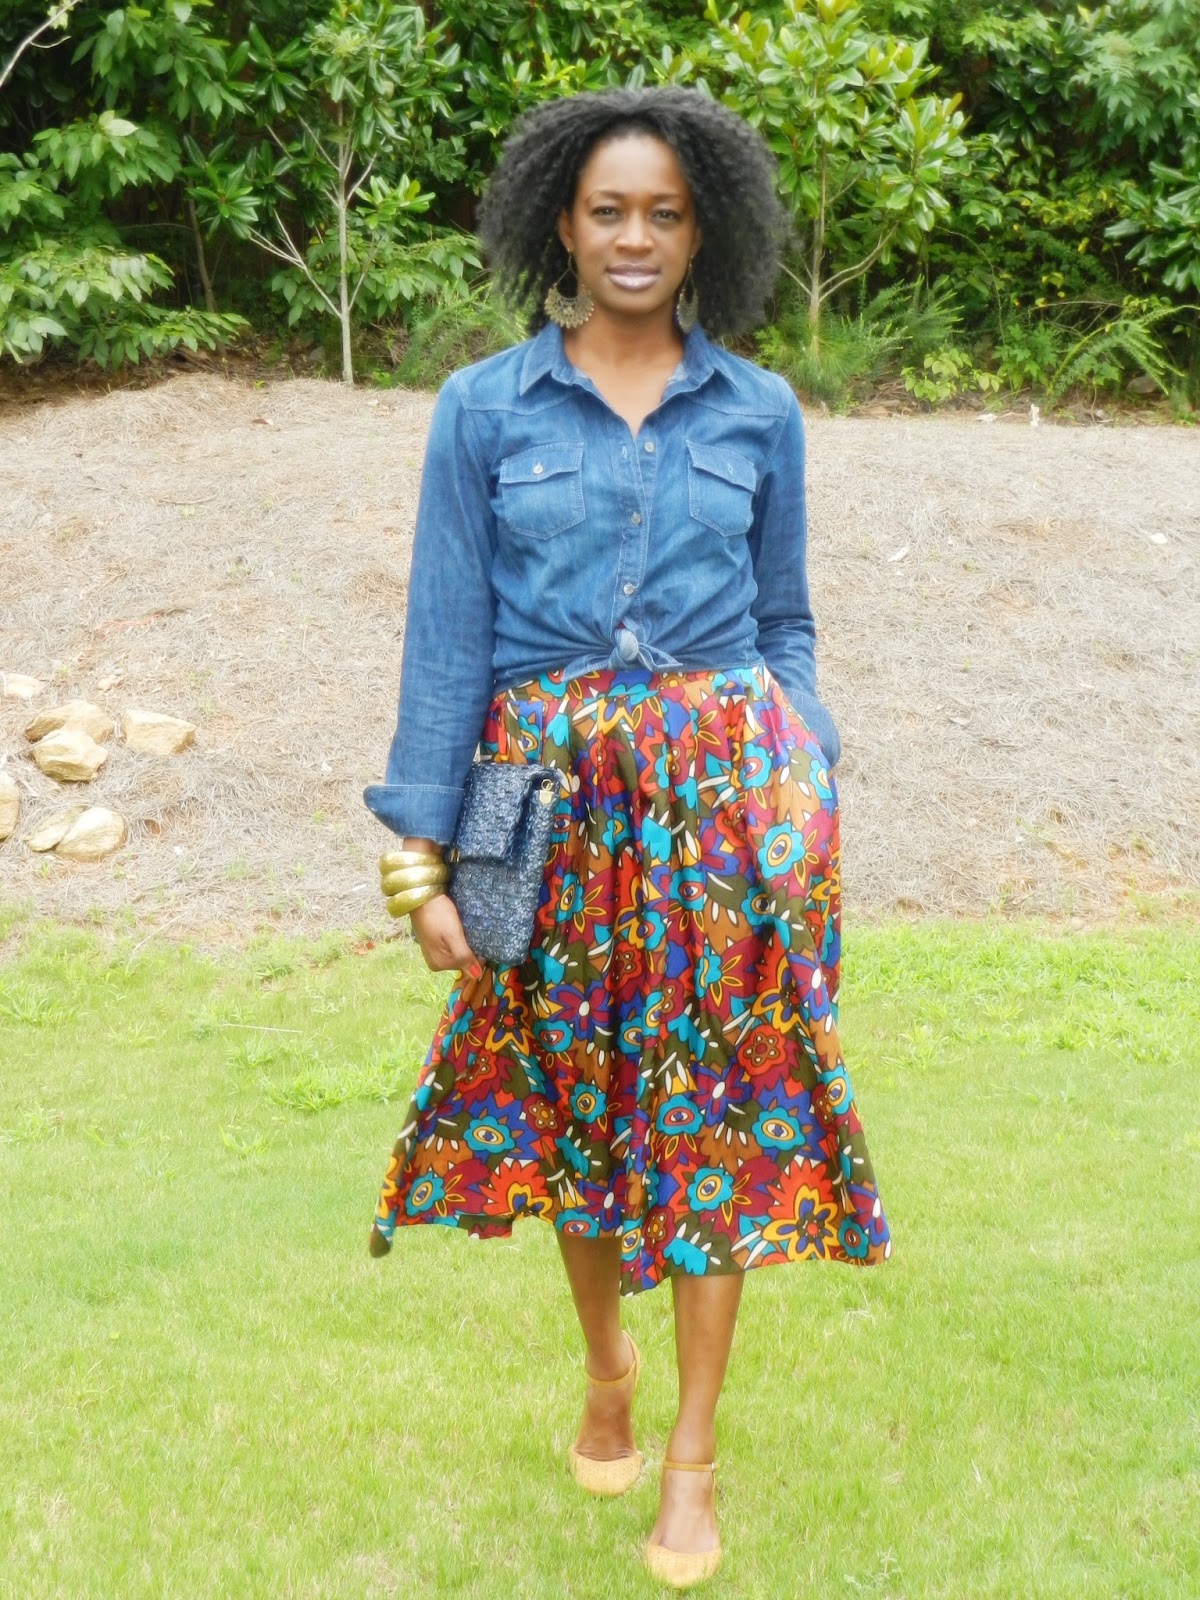 Thrifted Trends: How To Wear a Denim Shirt | Two Stylish Kays